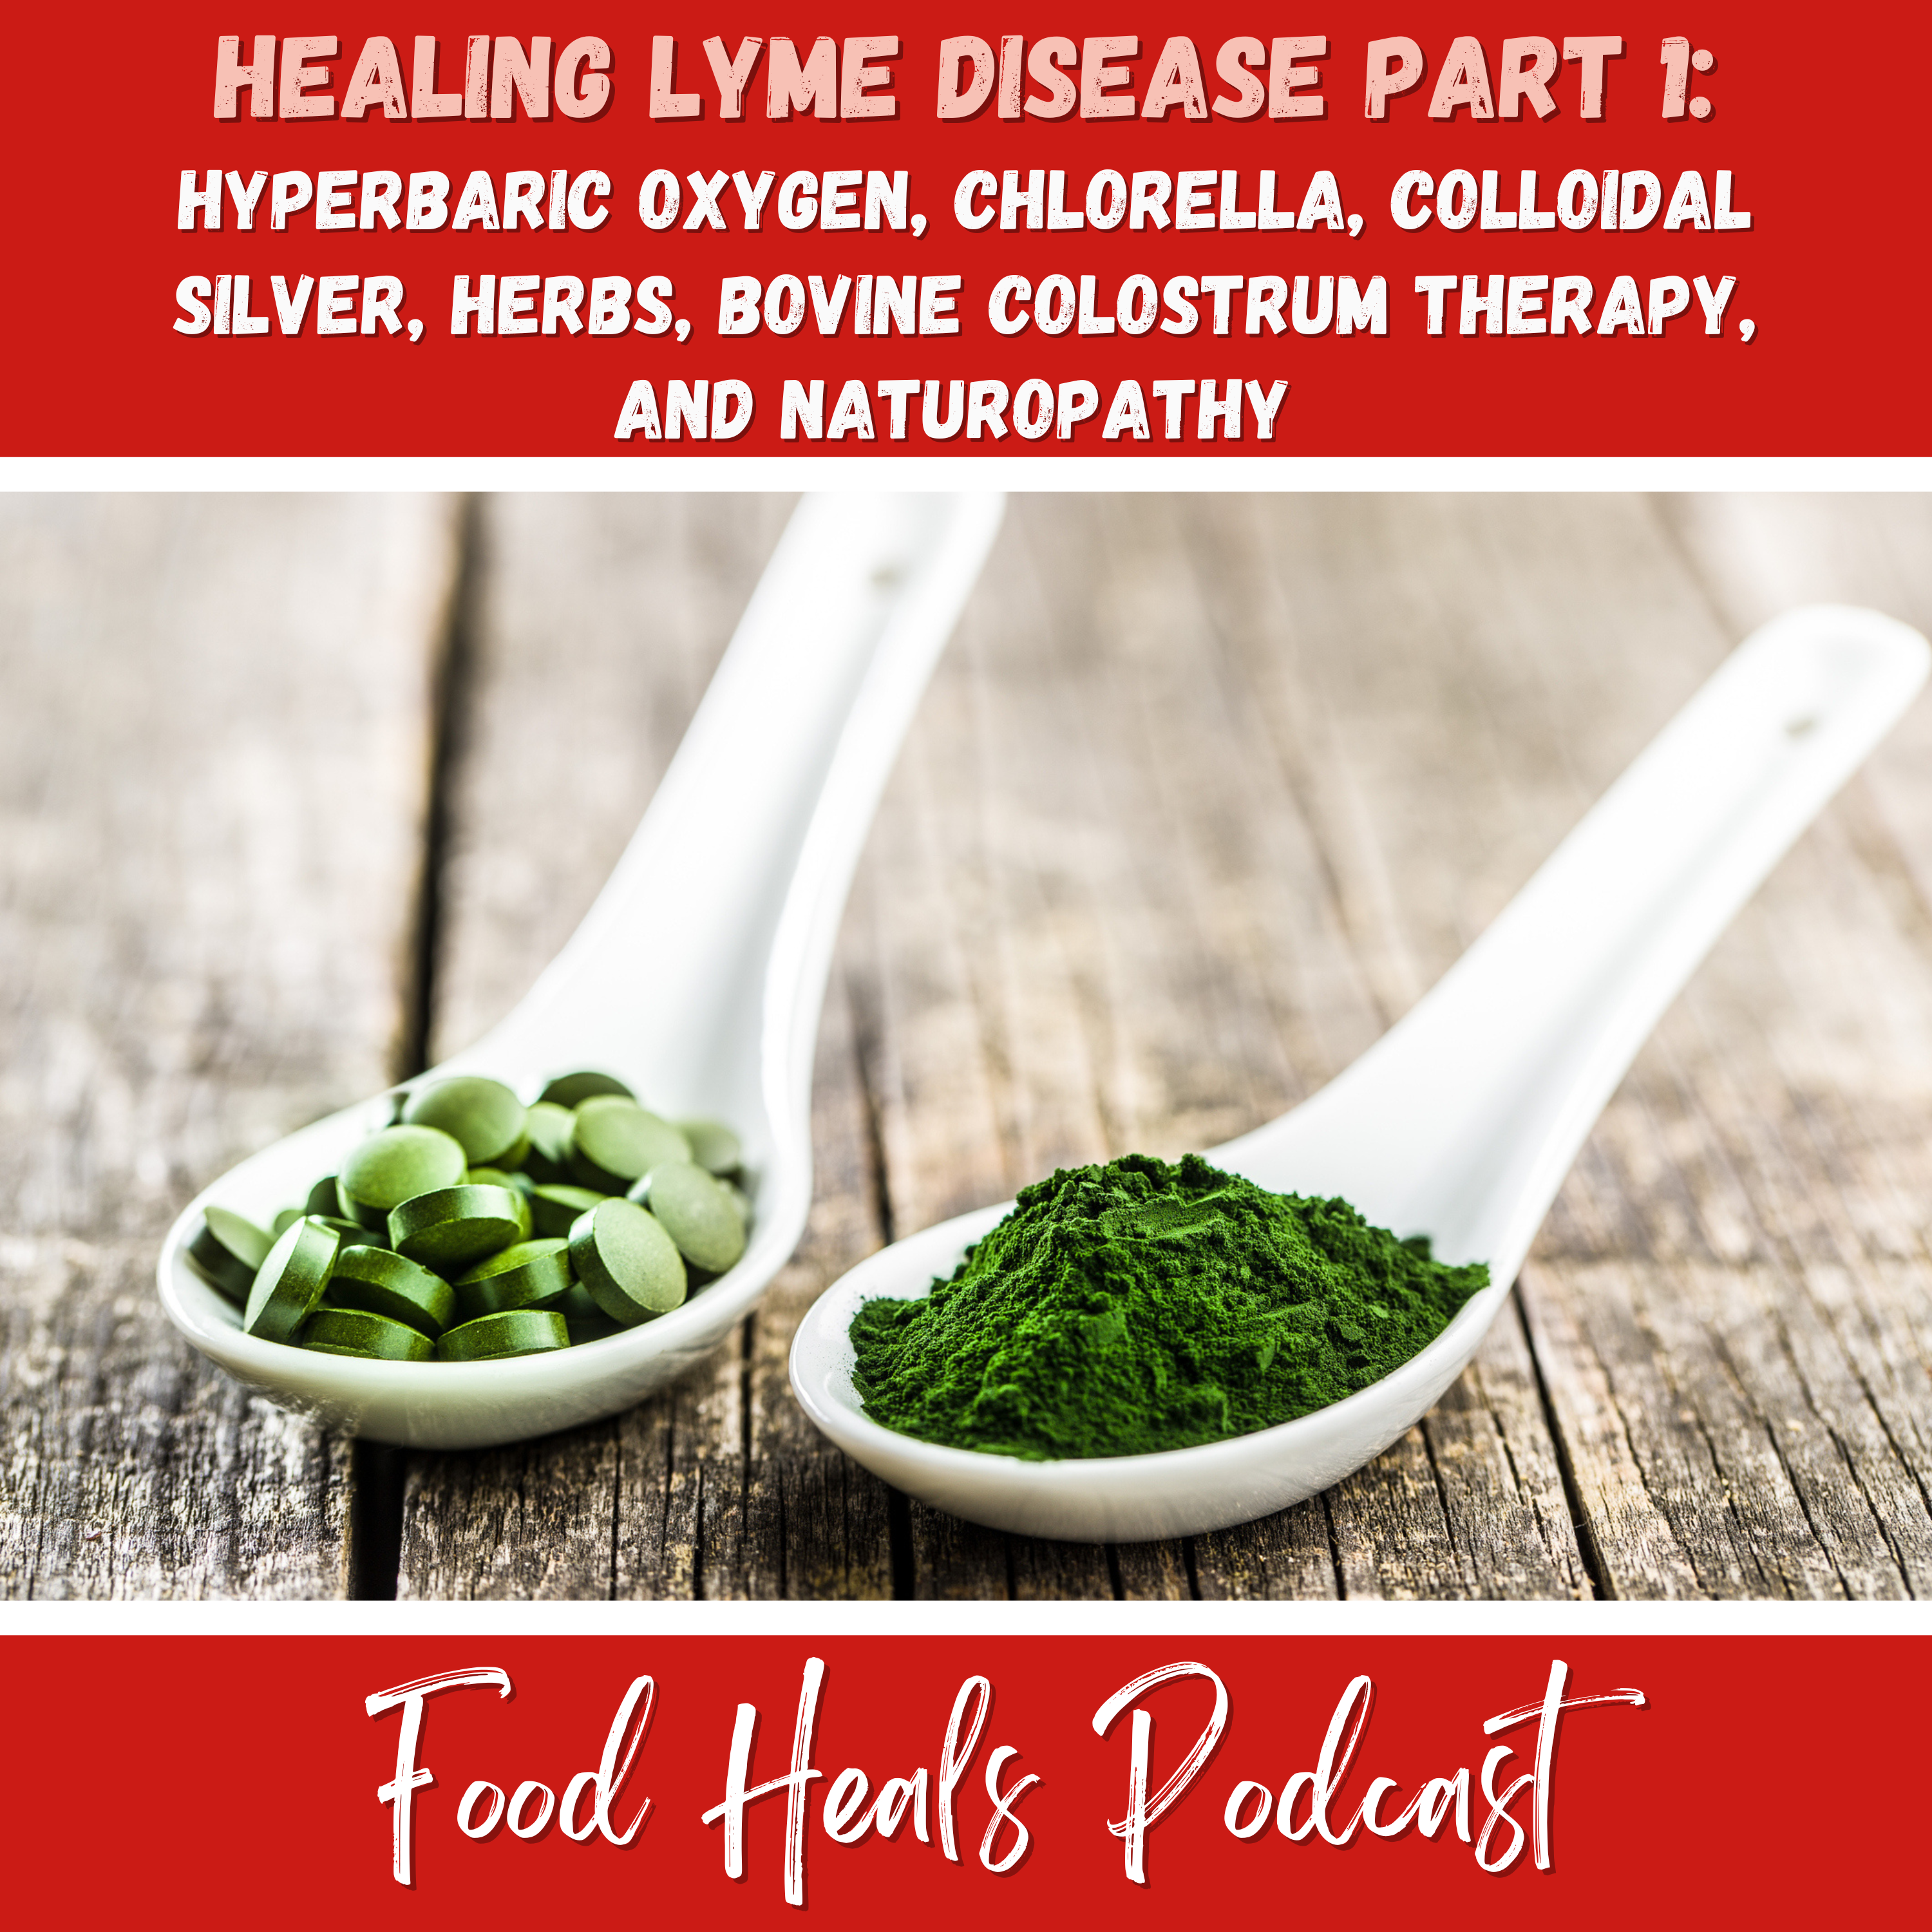 Healing Lyme: Hyperbaric Oxygen, Chlorella, Colloidal Silver, Herbs, Bovine Colostrum Therapy, and Naturopathy (Healing Lyme Disease Series Part 1 Food Heals Podcast)